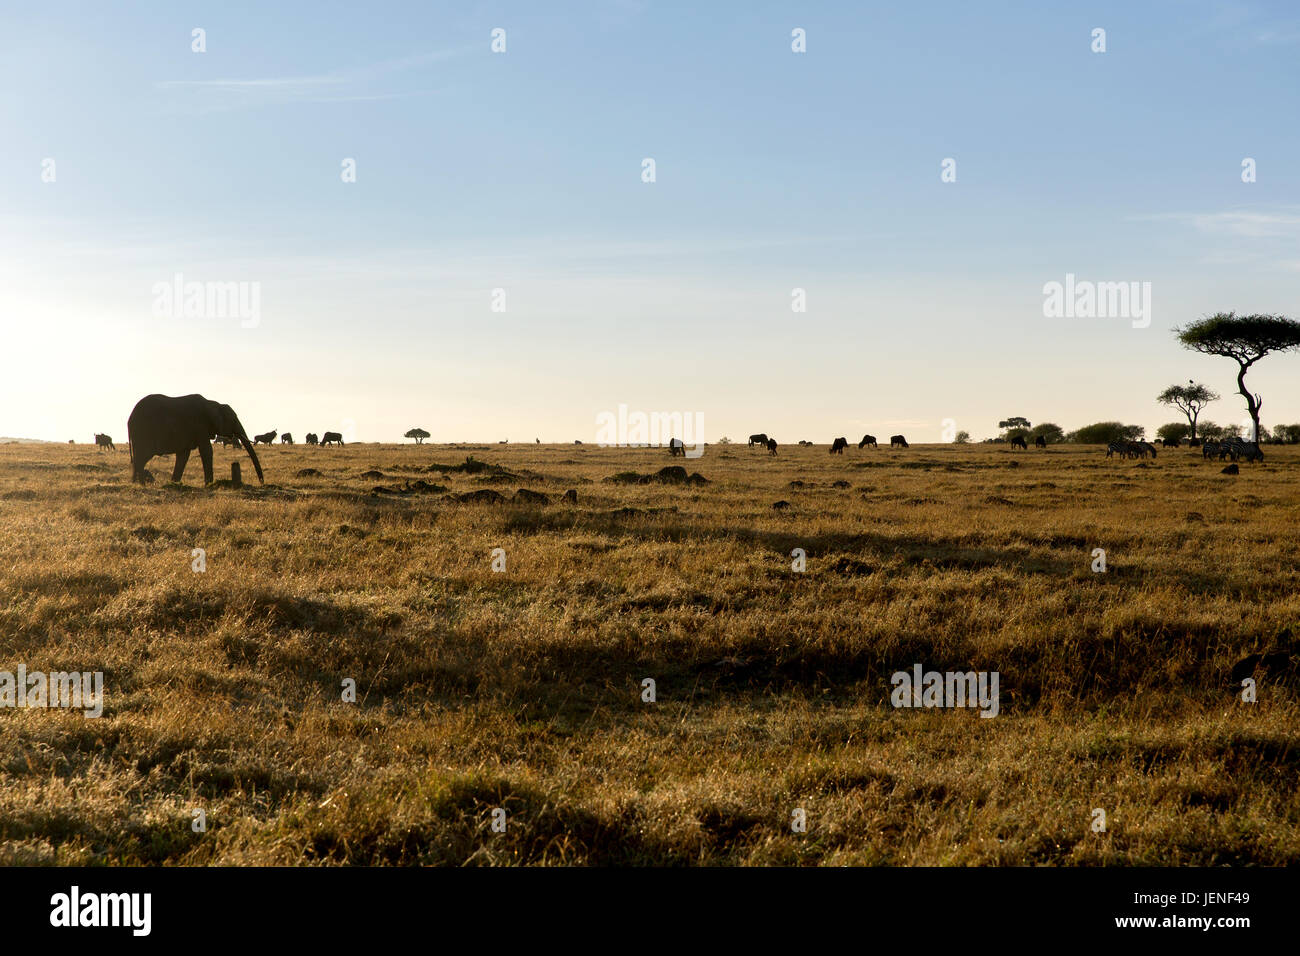 group of herbivore animals in savannah at africa Stock Photo